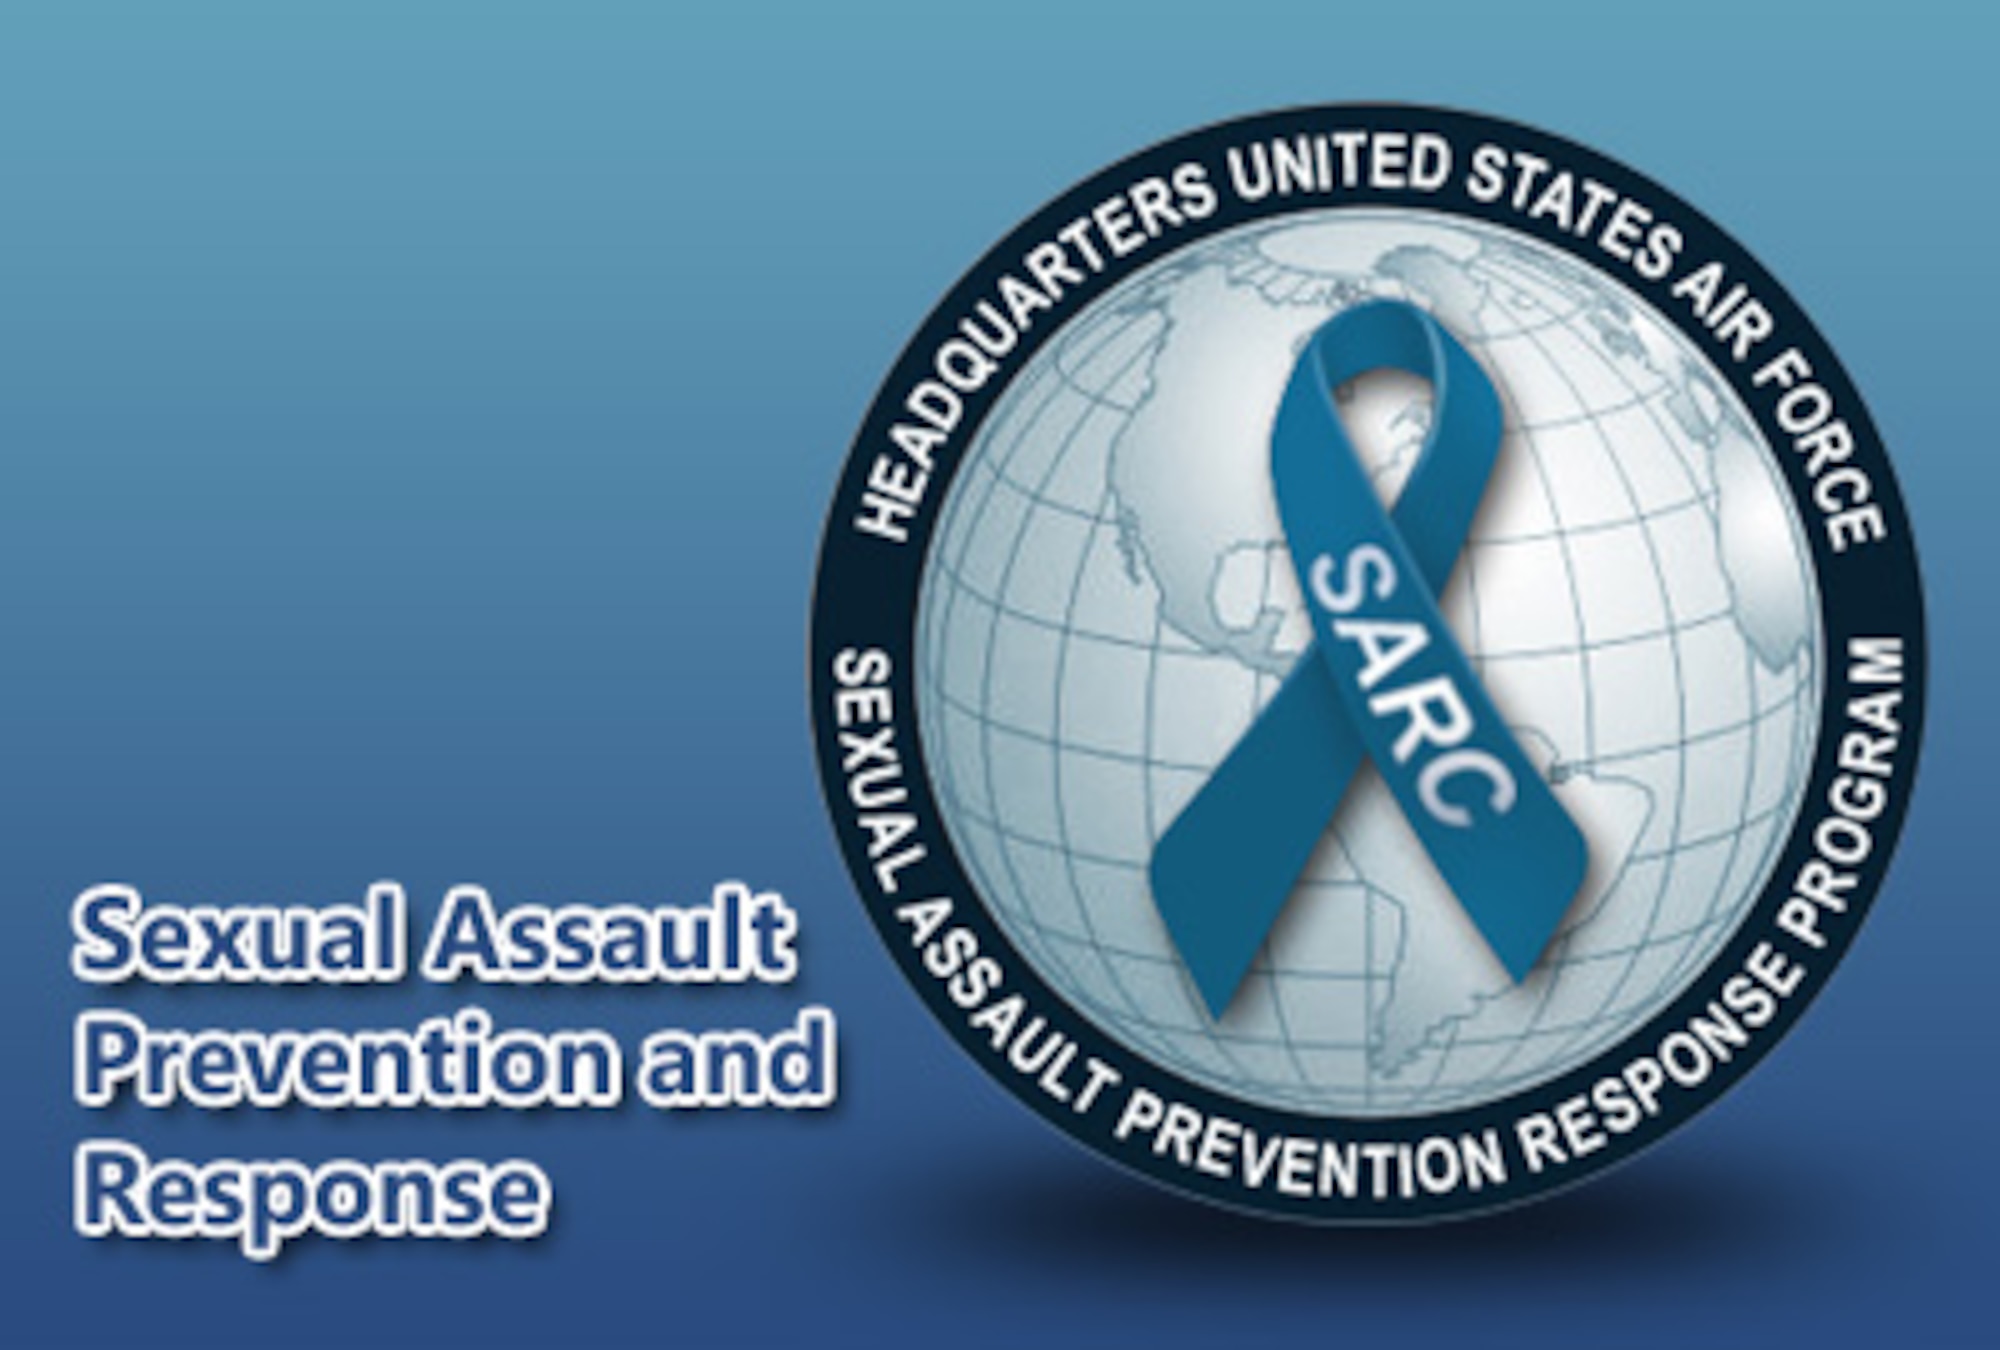 WASHINGTON – Air Force Secretary Michael Donley directed a comprehensive review of the service’s Sexual Assault Prevention and Response Program as a result of information provided by a survey of active duty members, officials said March 16.